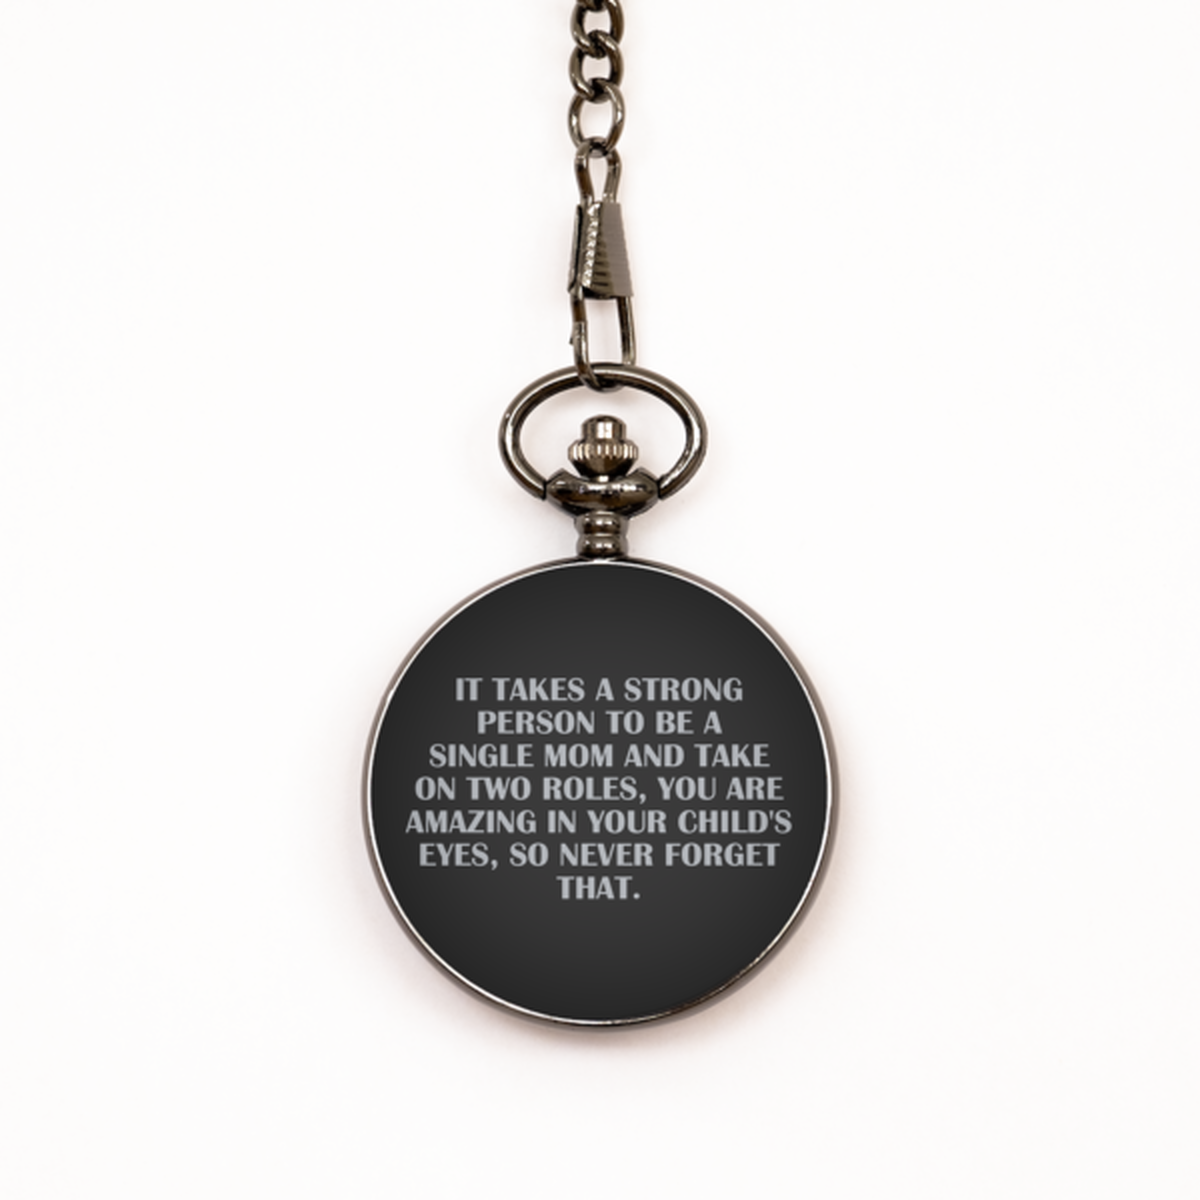 To My Single Mom Black Pocket Watch, A Strong Person, Mothers Day Gifts For Single Mom From Friends, Birthday Gifts For Women